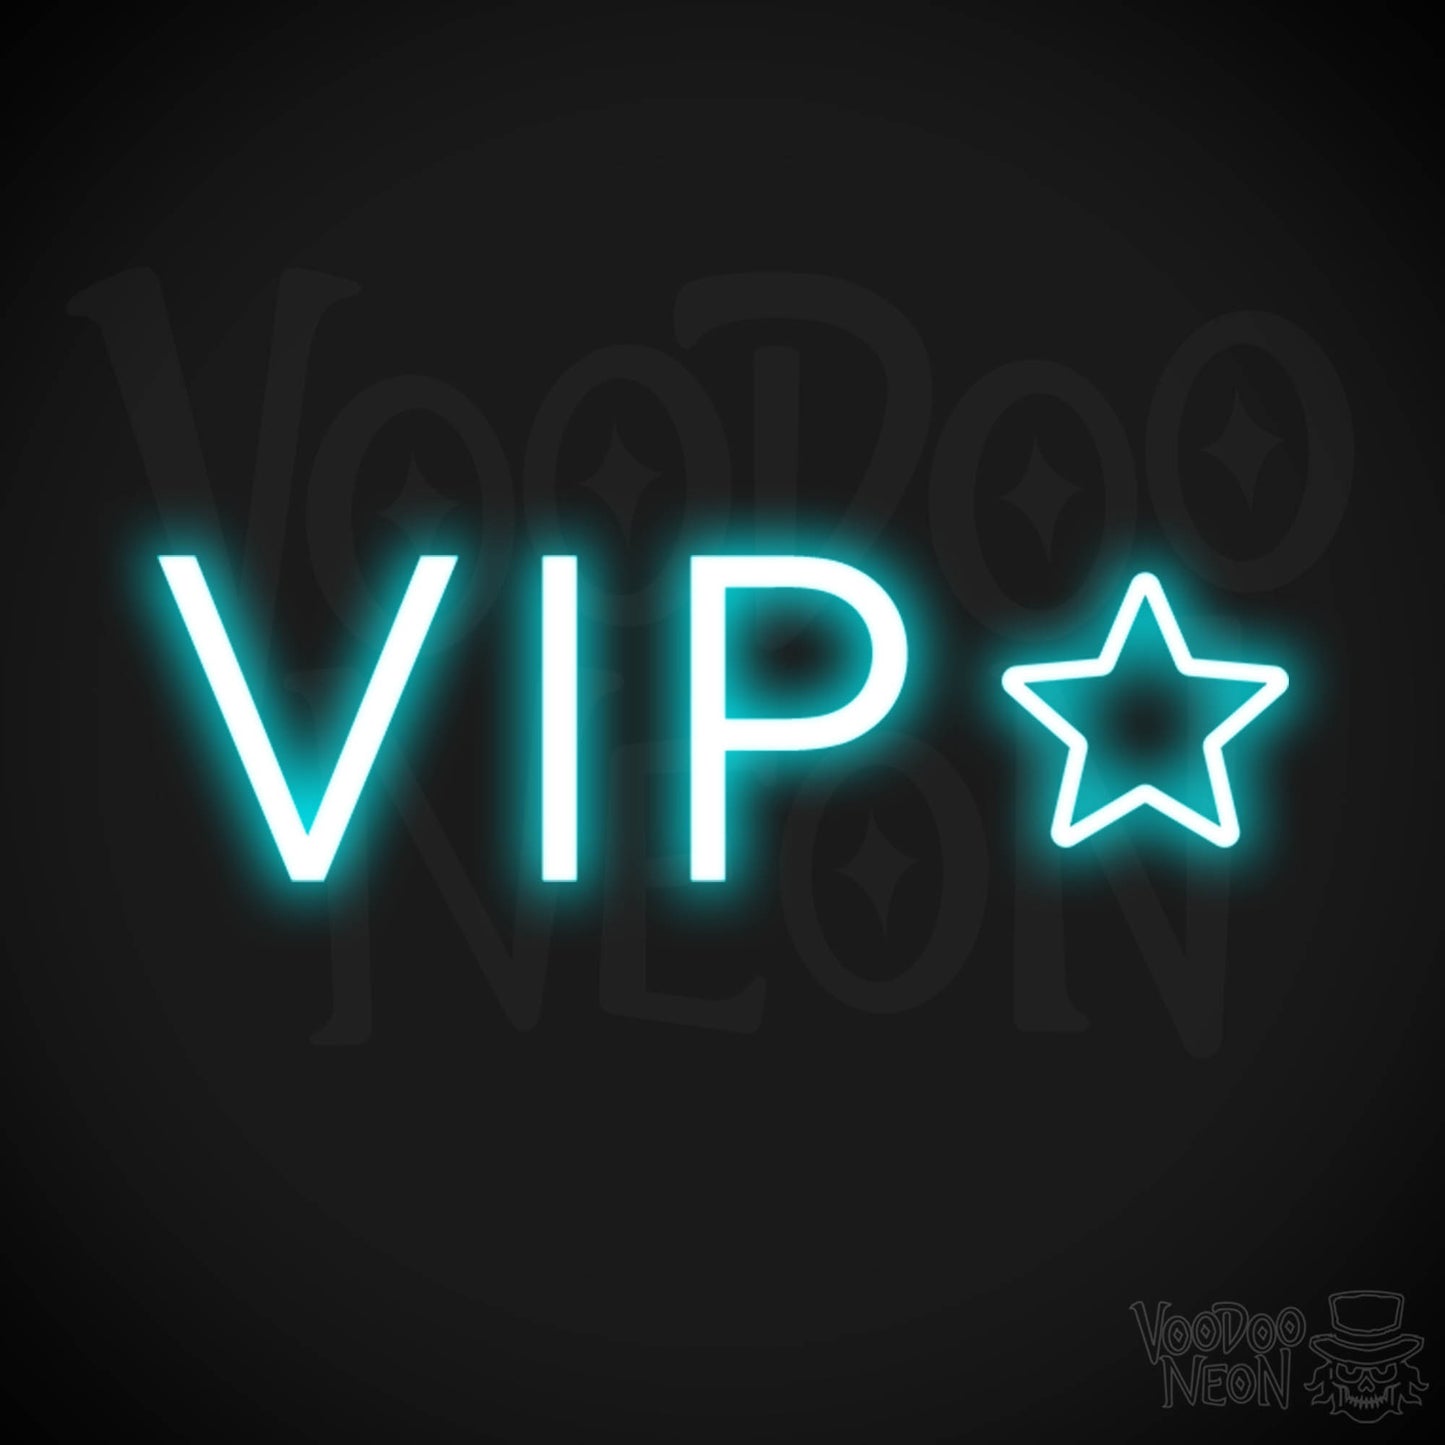 VIP Neon Sign - Neon VIP Sign - VIP LED Sign - Color Ice Blue